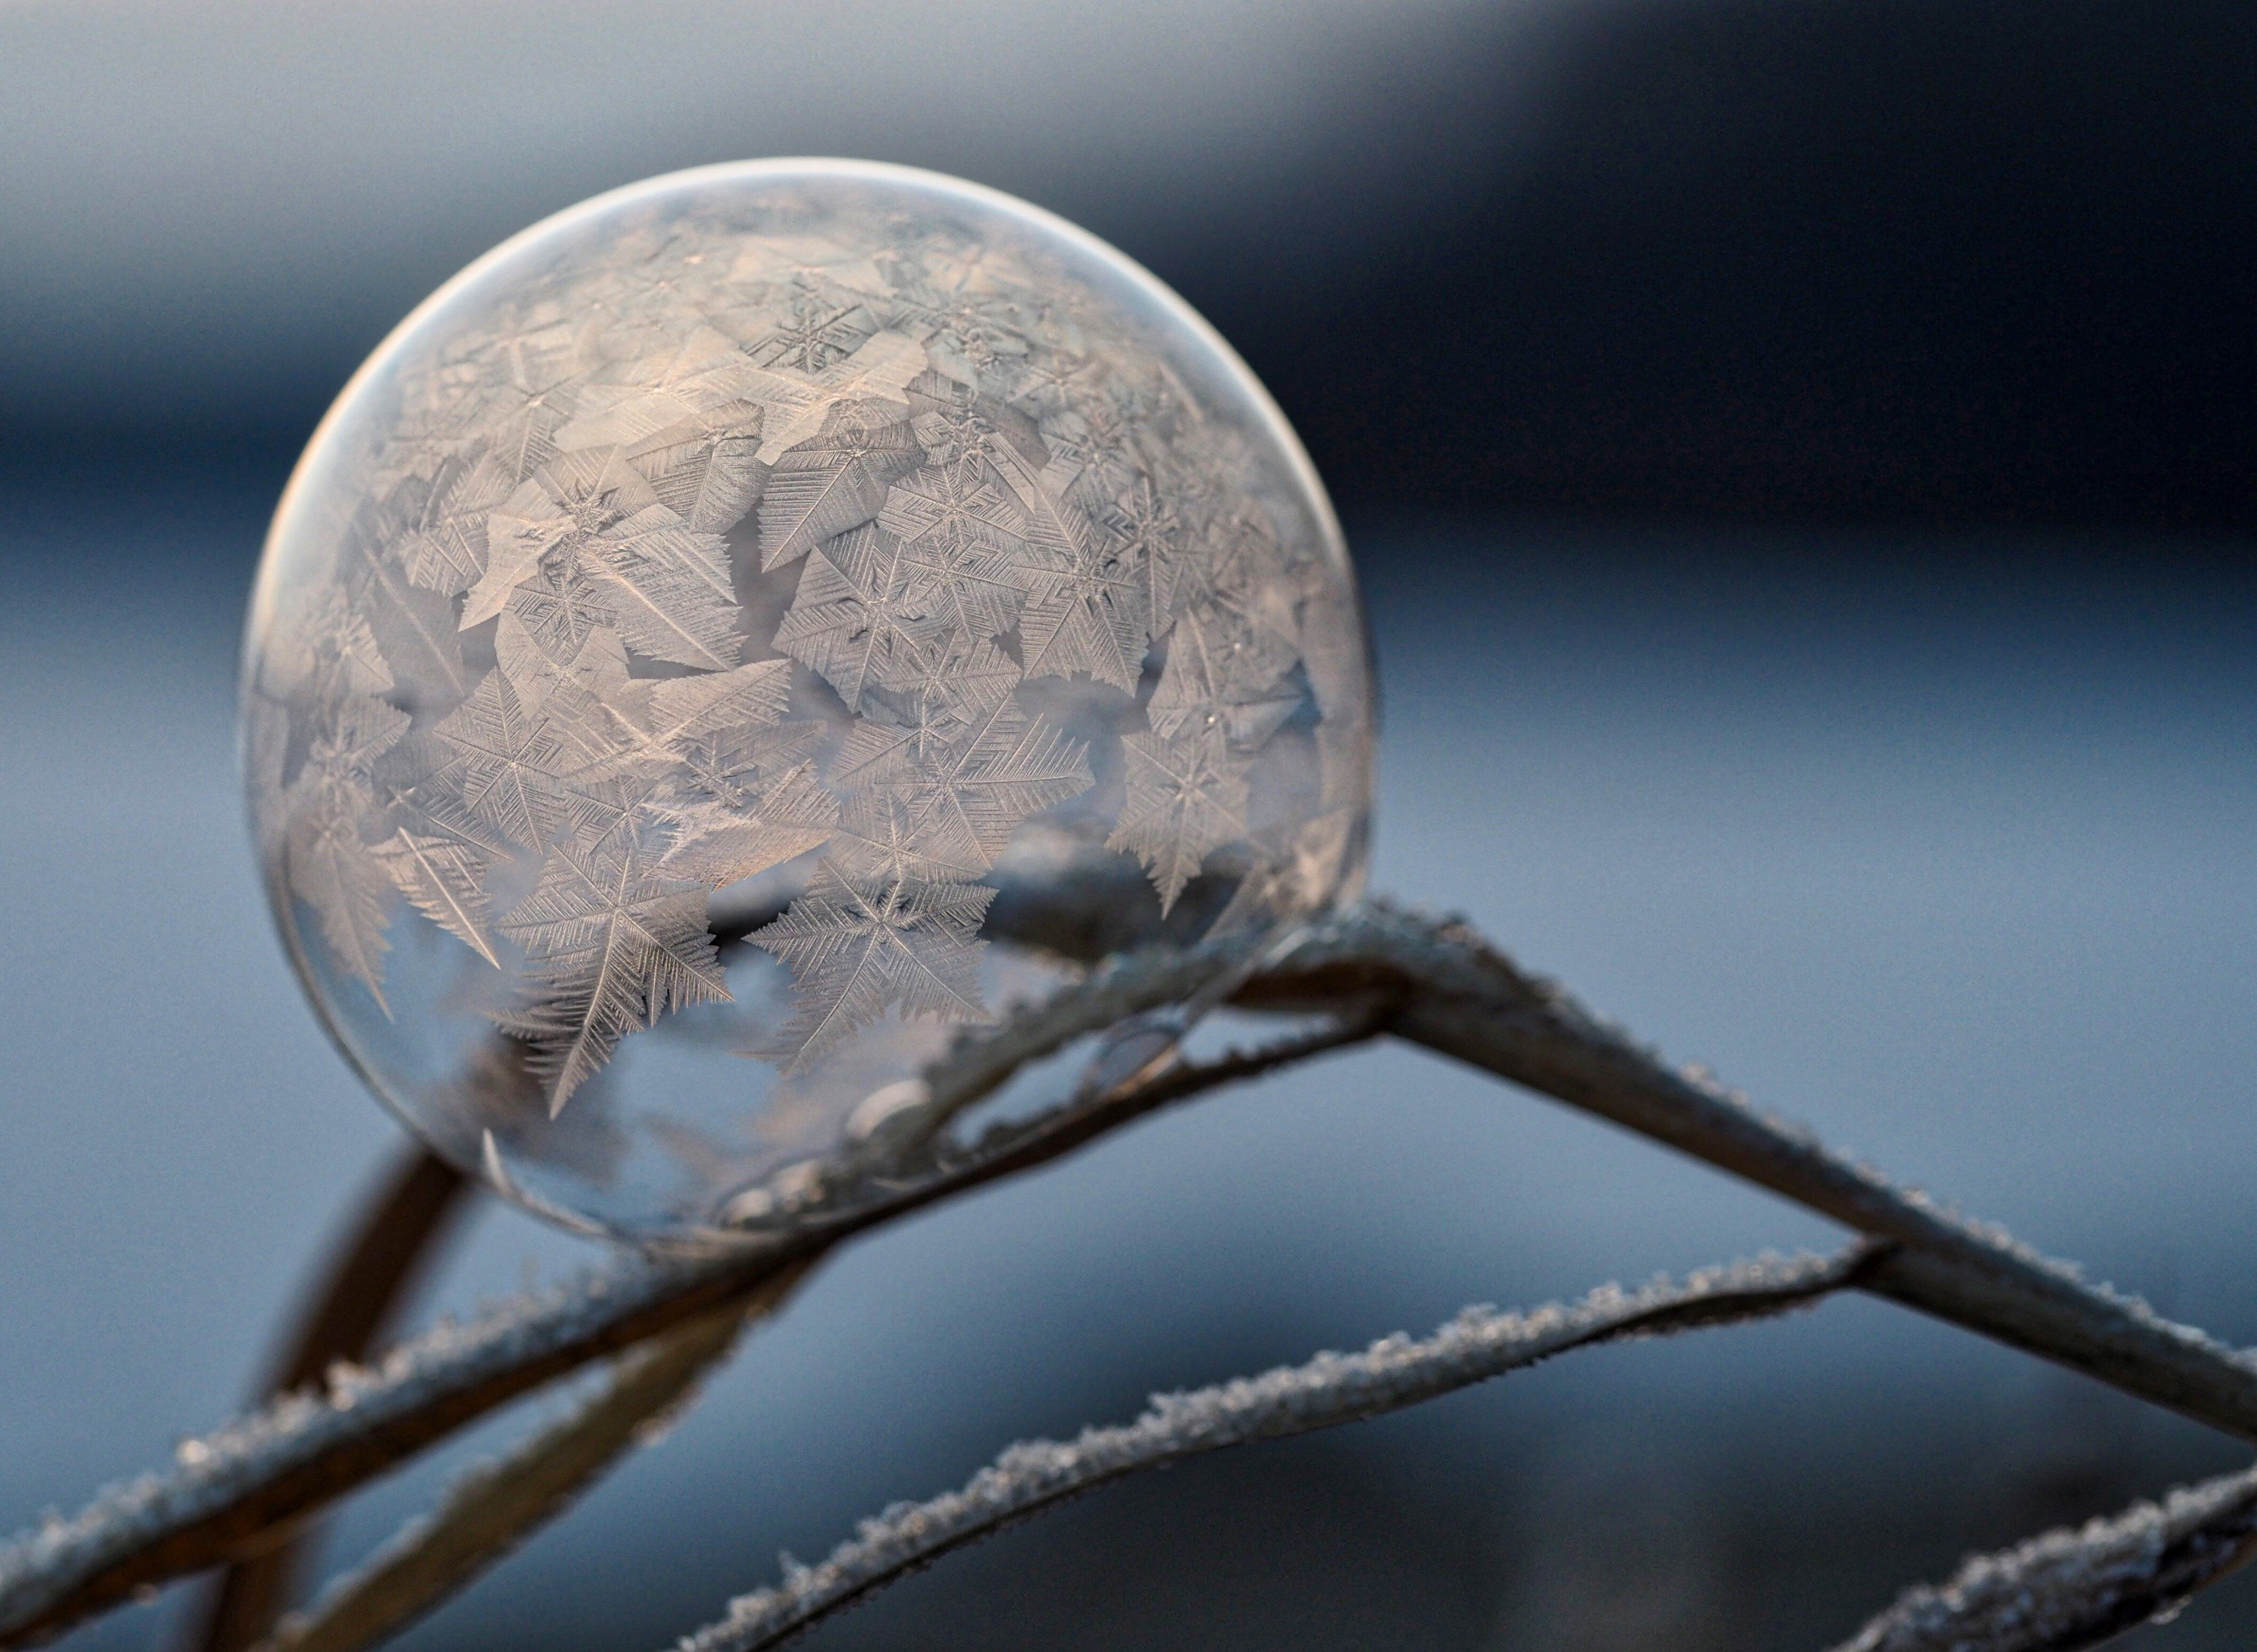 Wallpaper / a macro frozen bubble with snowflake and crystal formations inside, frozen snowflake bubble 4k wallpaper